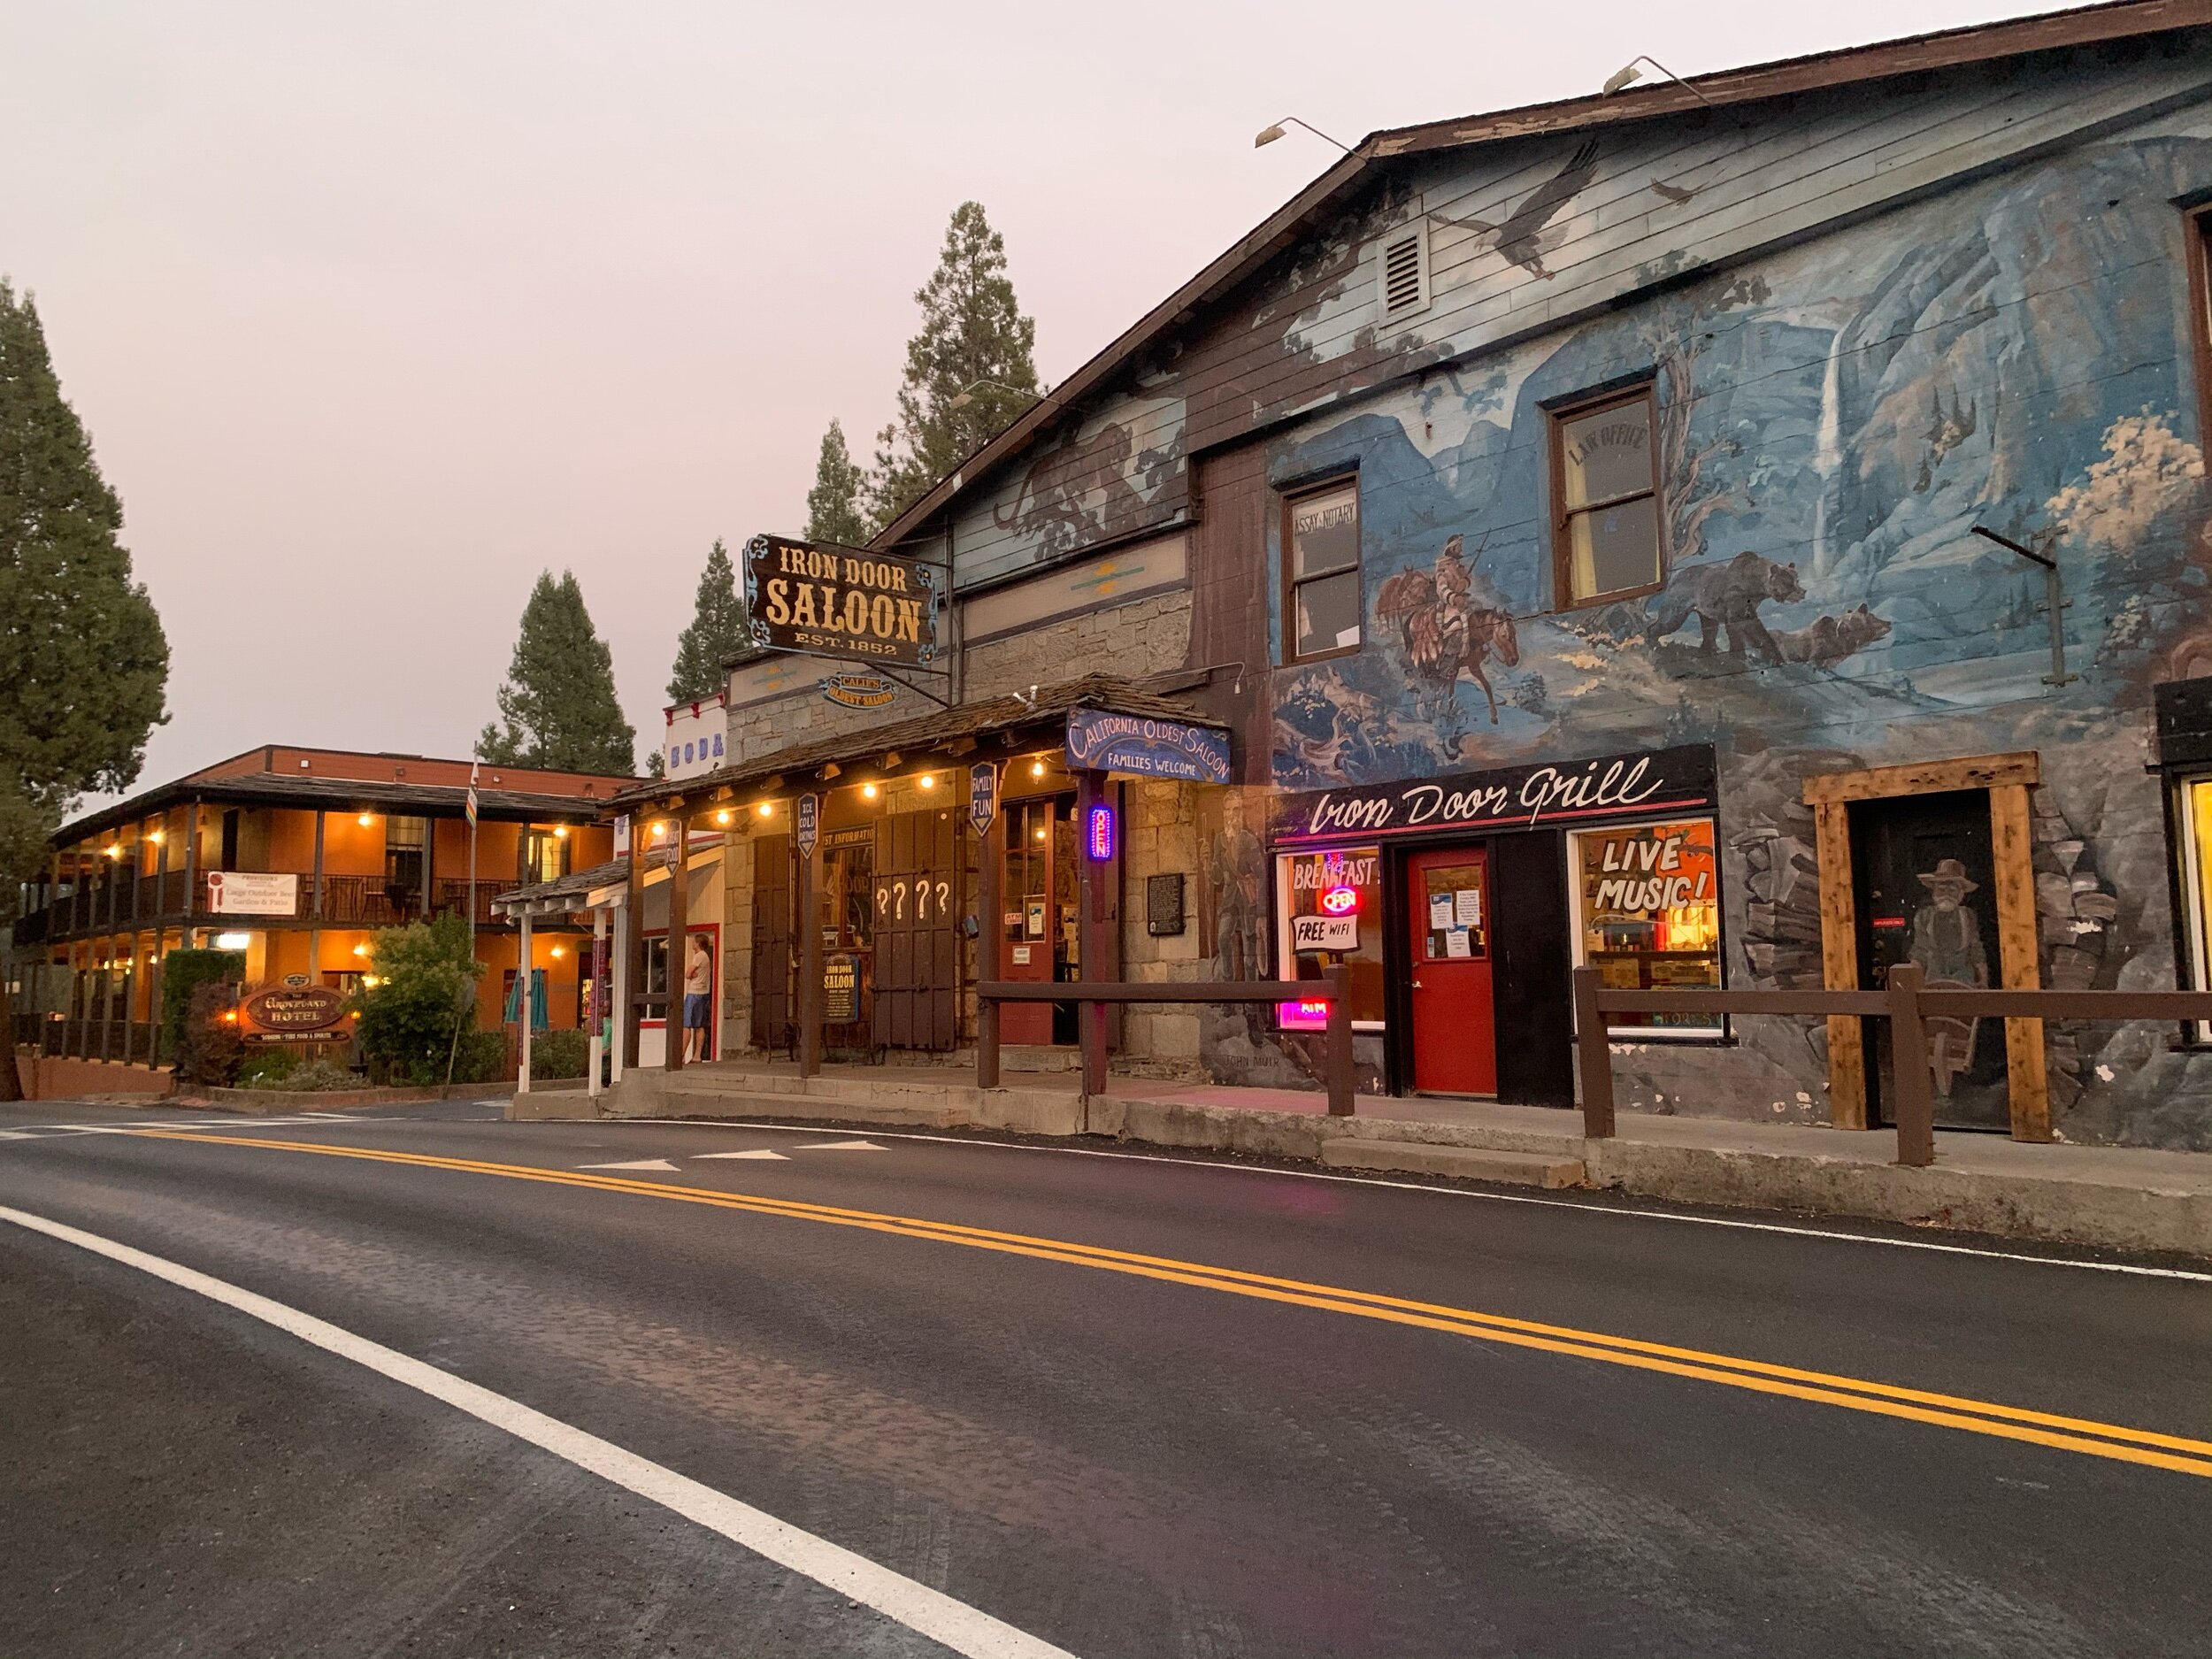  Our RV park was in the small town of Groveland, home of California’s oldest saloon, outside of Yosemite.  The saloon has been open since 1852 and still has its original bar intact.  